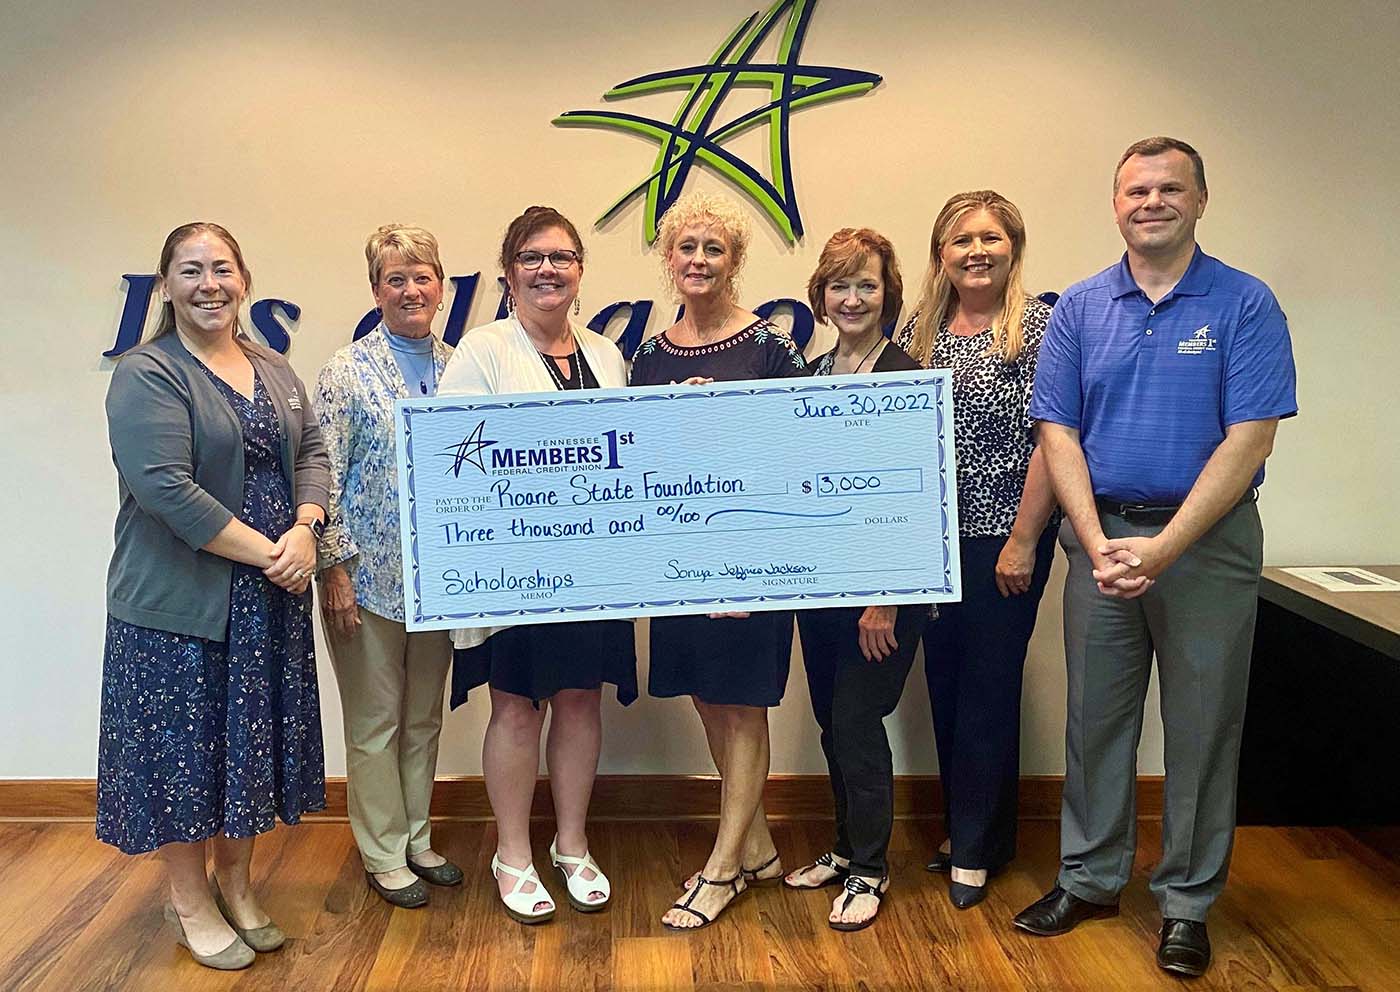 TN Members 1st FCU presents a check to Roane State Community College’s non-profit Foundation for $3,000. Pictured left to right are: Richelle Ballenger, TN Members 1st AVP Marketing; Joy Goldberg, Roane State Foundation Board Member; Pamela Rudnitzki, Roane State Foundation Director of Student Programs; Sonya Jackson, TN Members 1st Board Chair; Judy Stone Wilson, TN Members 1st Board Member; Nancy Taylor, TN Members 1st Board Member; and Rick Mikels, TN Members 1st President/CEO.